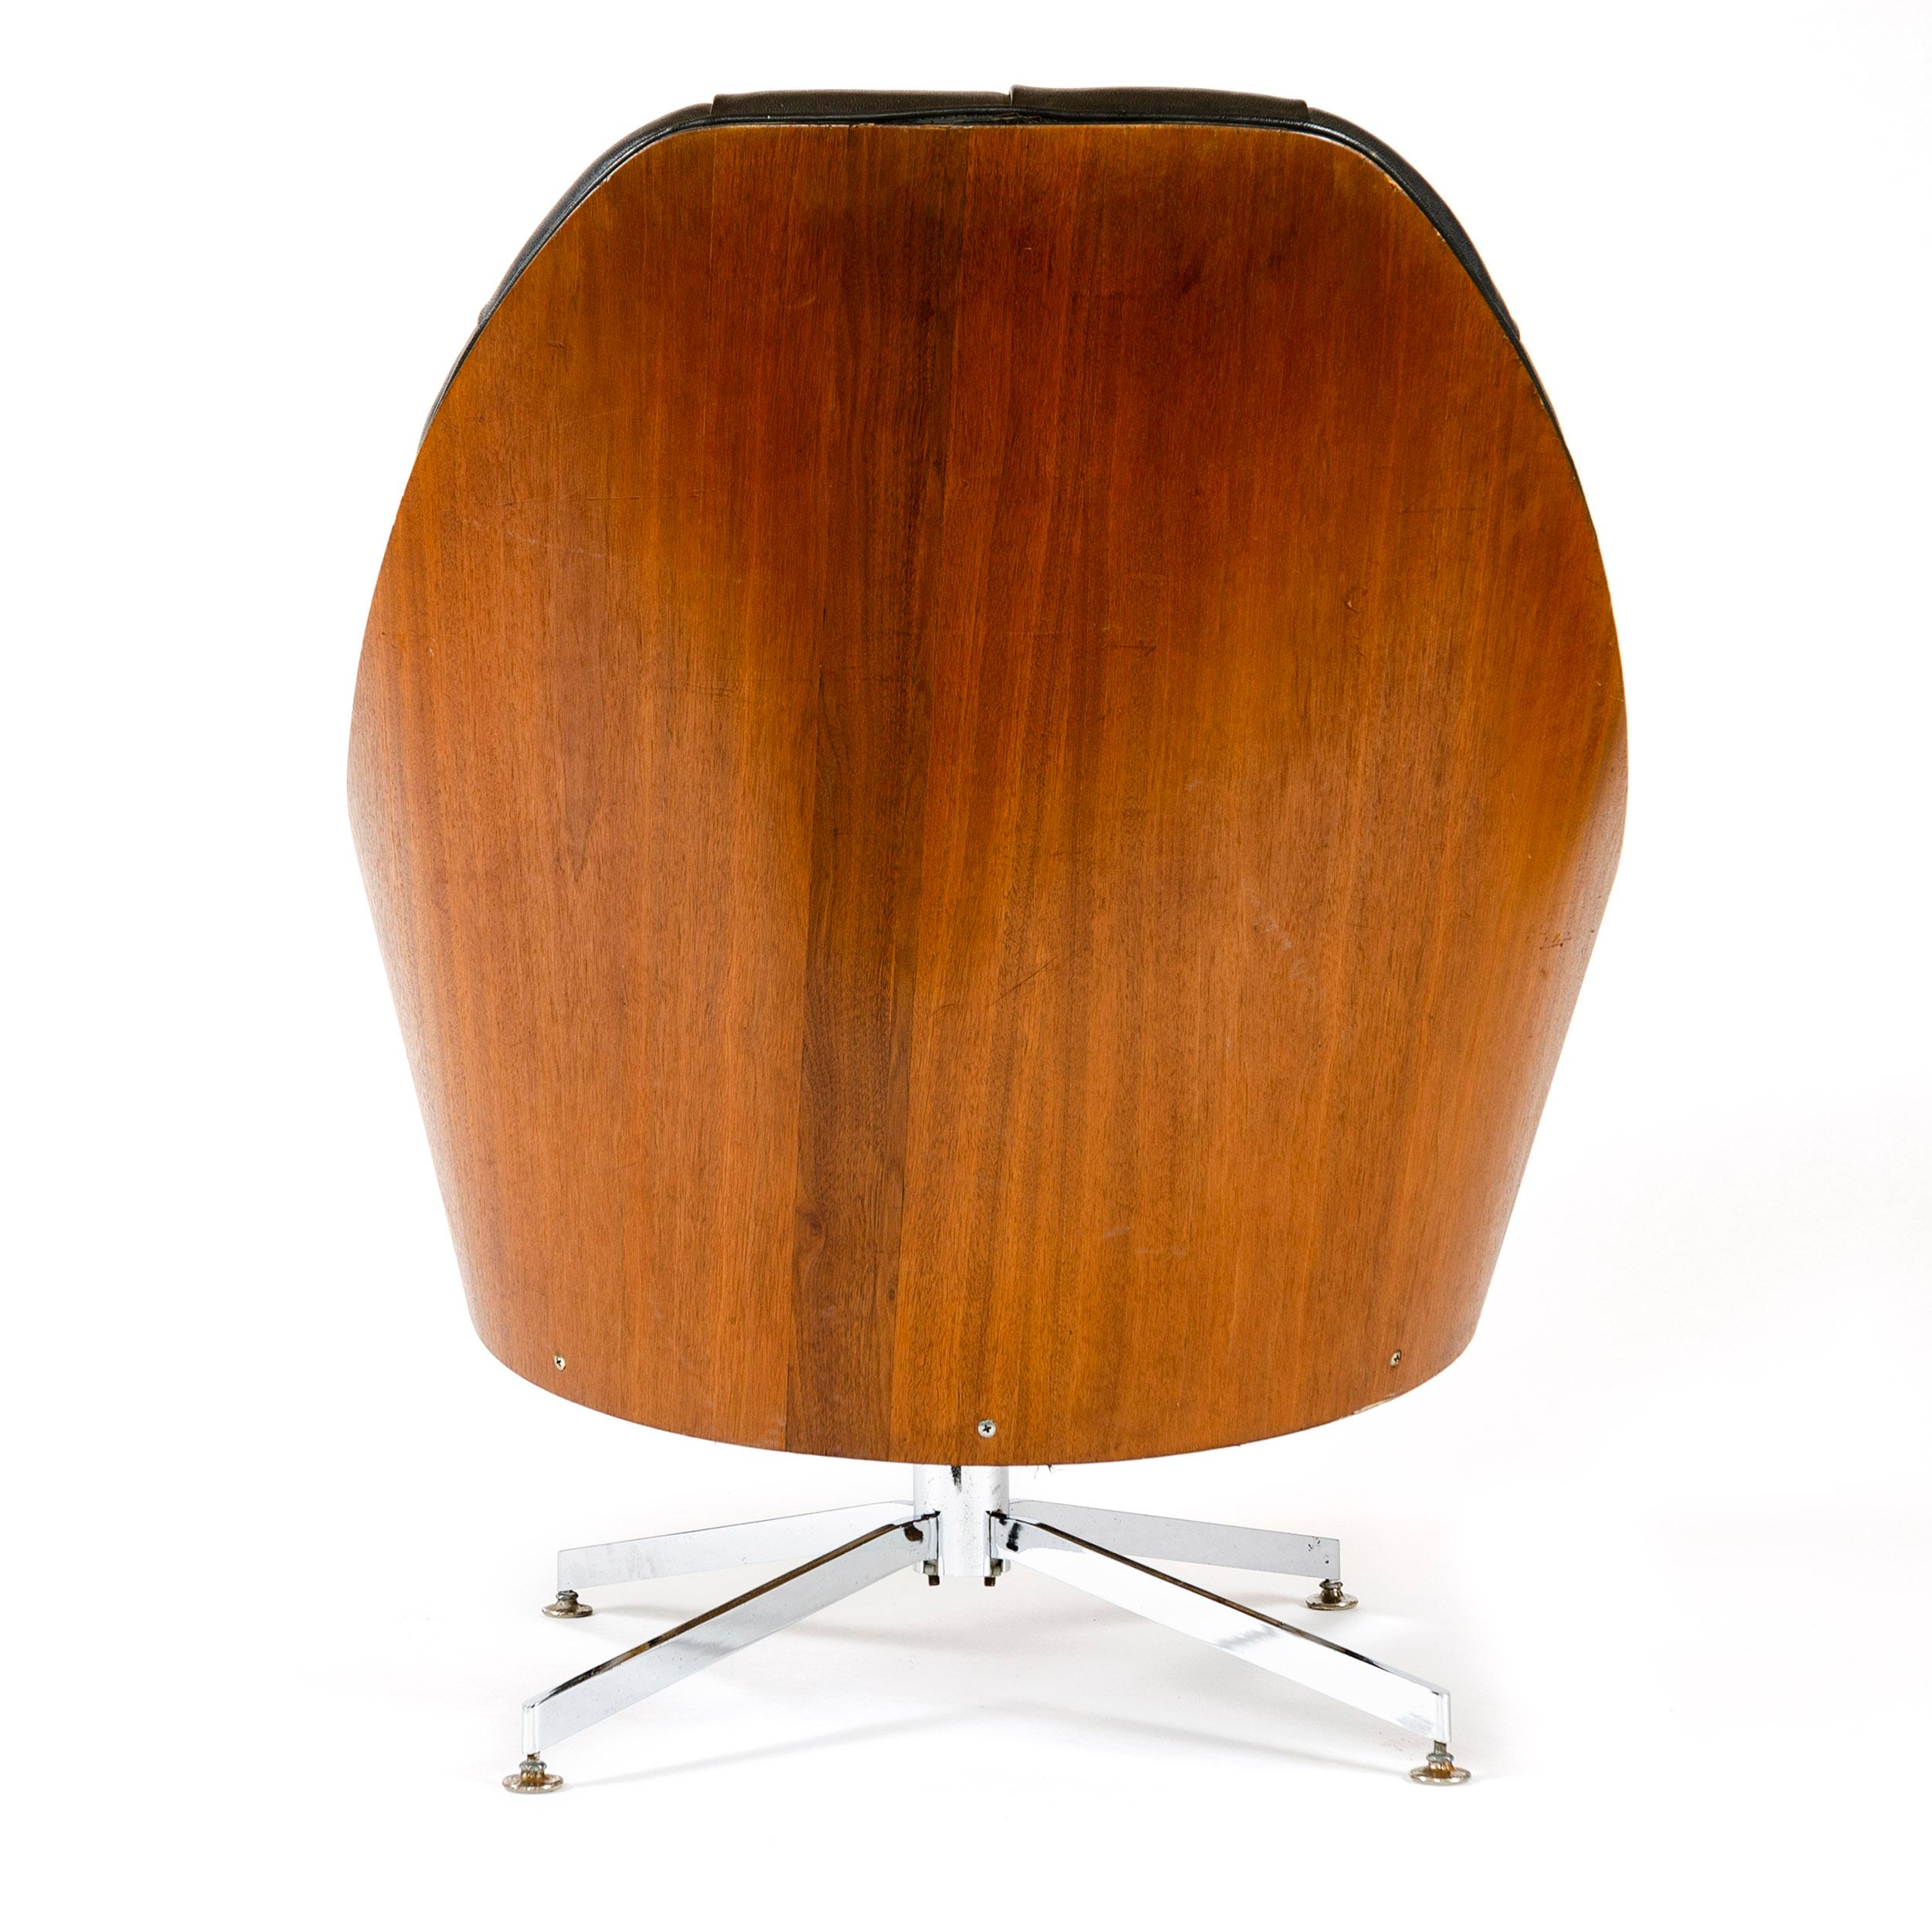 American 1960s Swiveling Lounge Chair by Milo Baughman for Thayer-Coggin